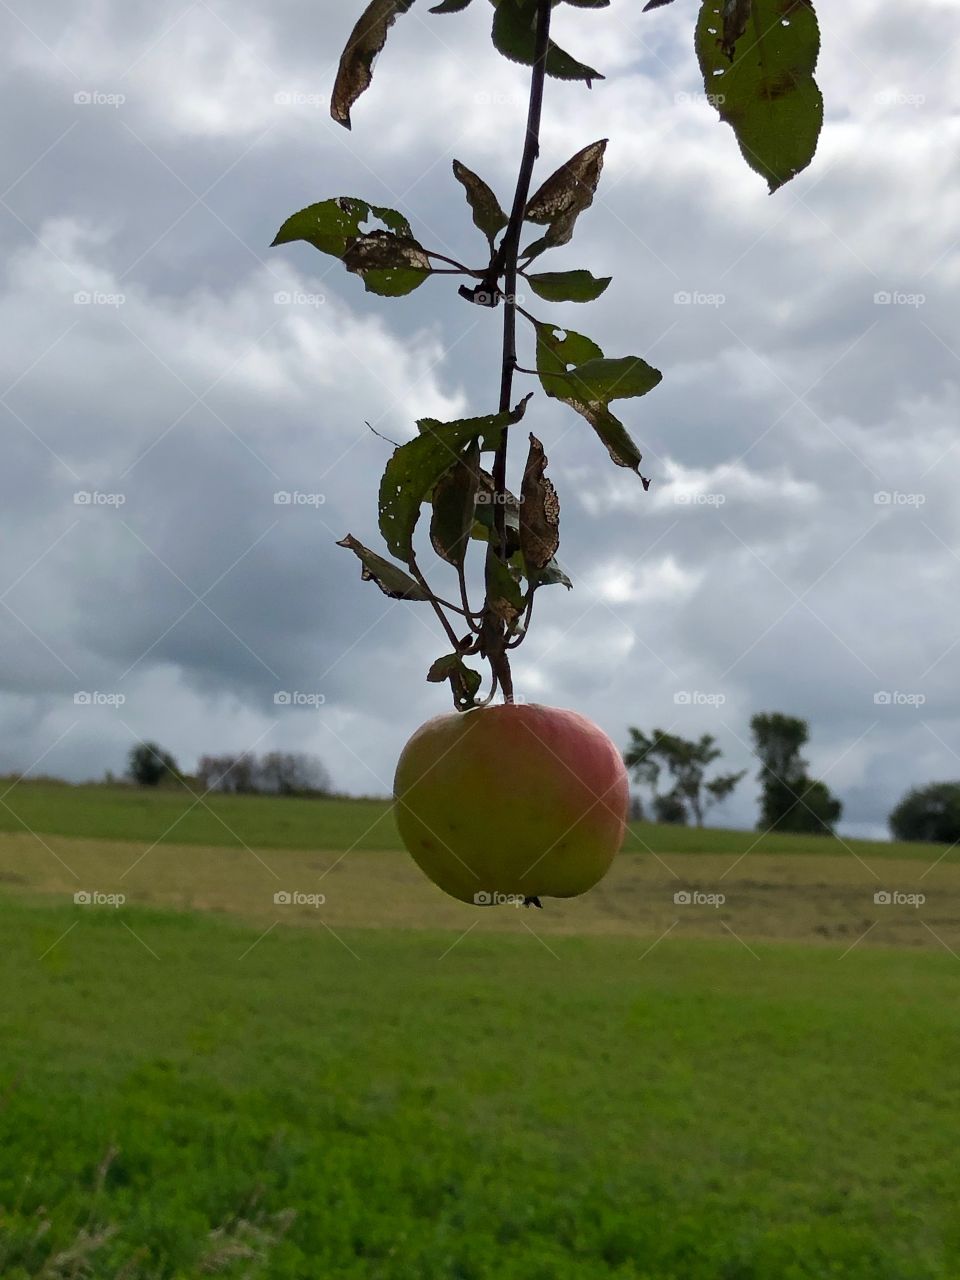 Just one lonely apple left hanging on the branch.